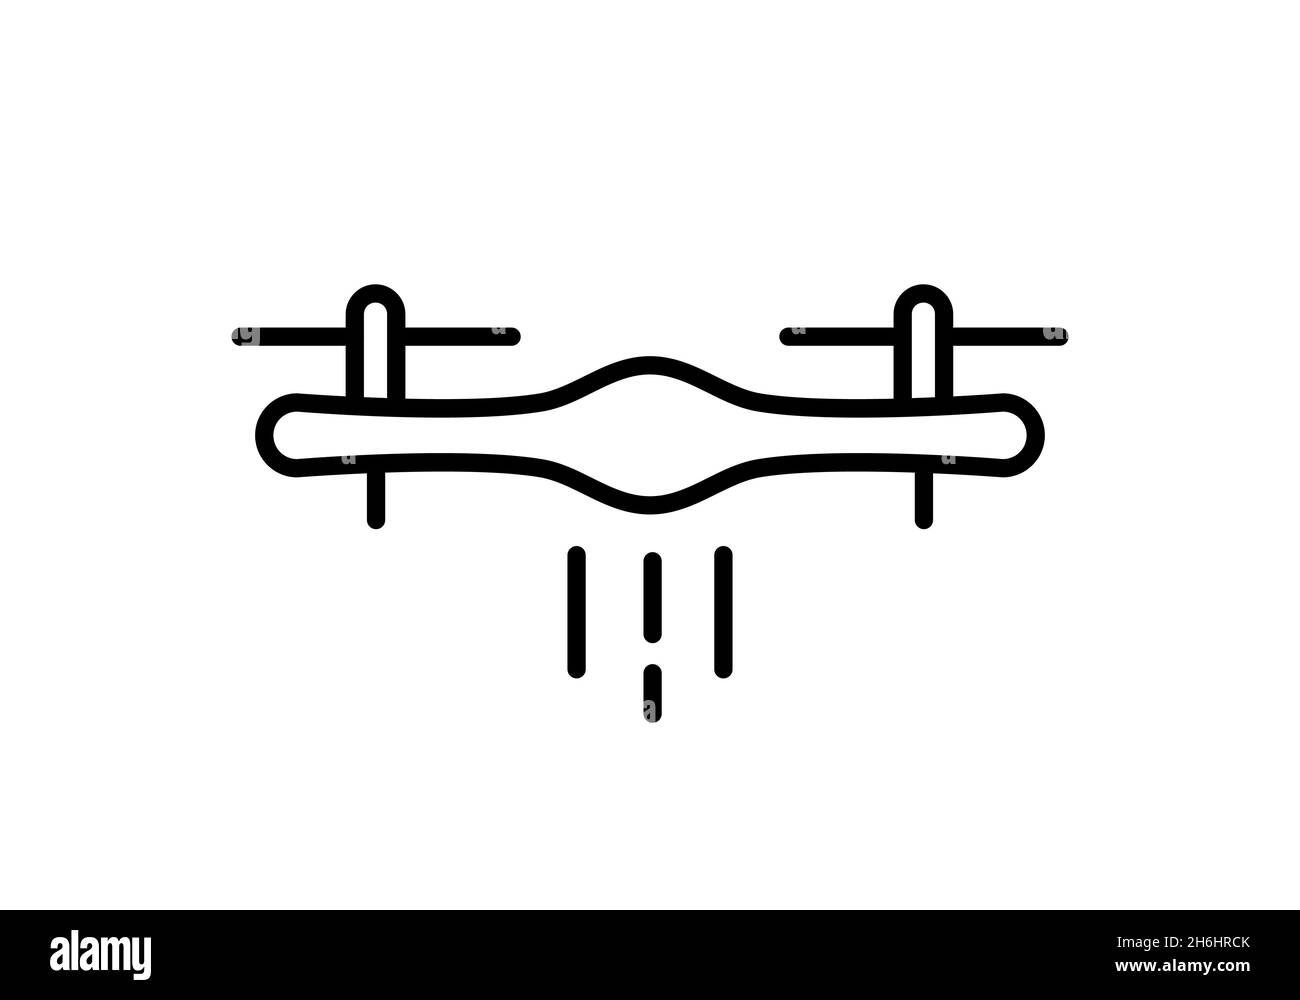 Delivery drone line icon. Quadcopter transportation by air concept. E-commerce logistics idea. Black drone outline on white background. Vector, flat. Stock Vector